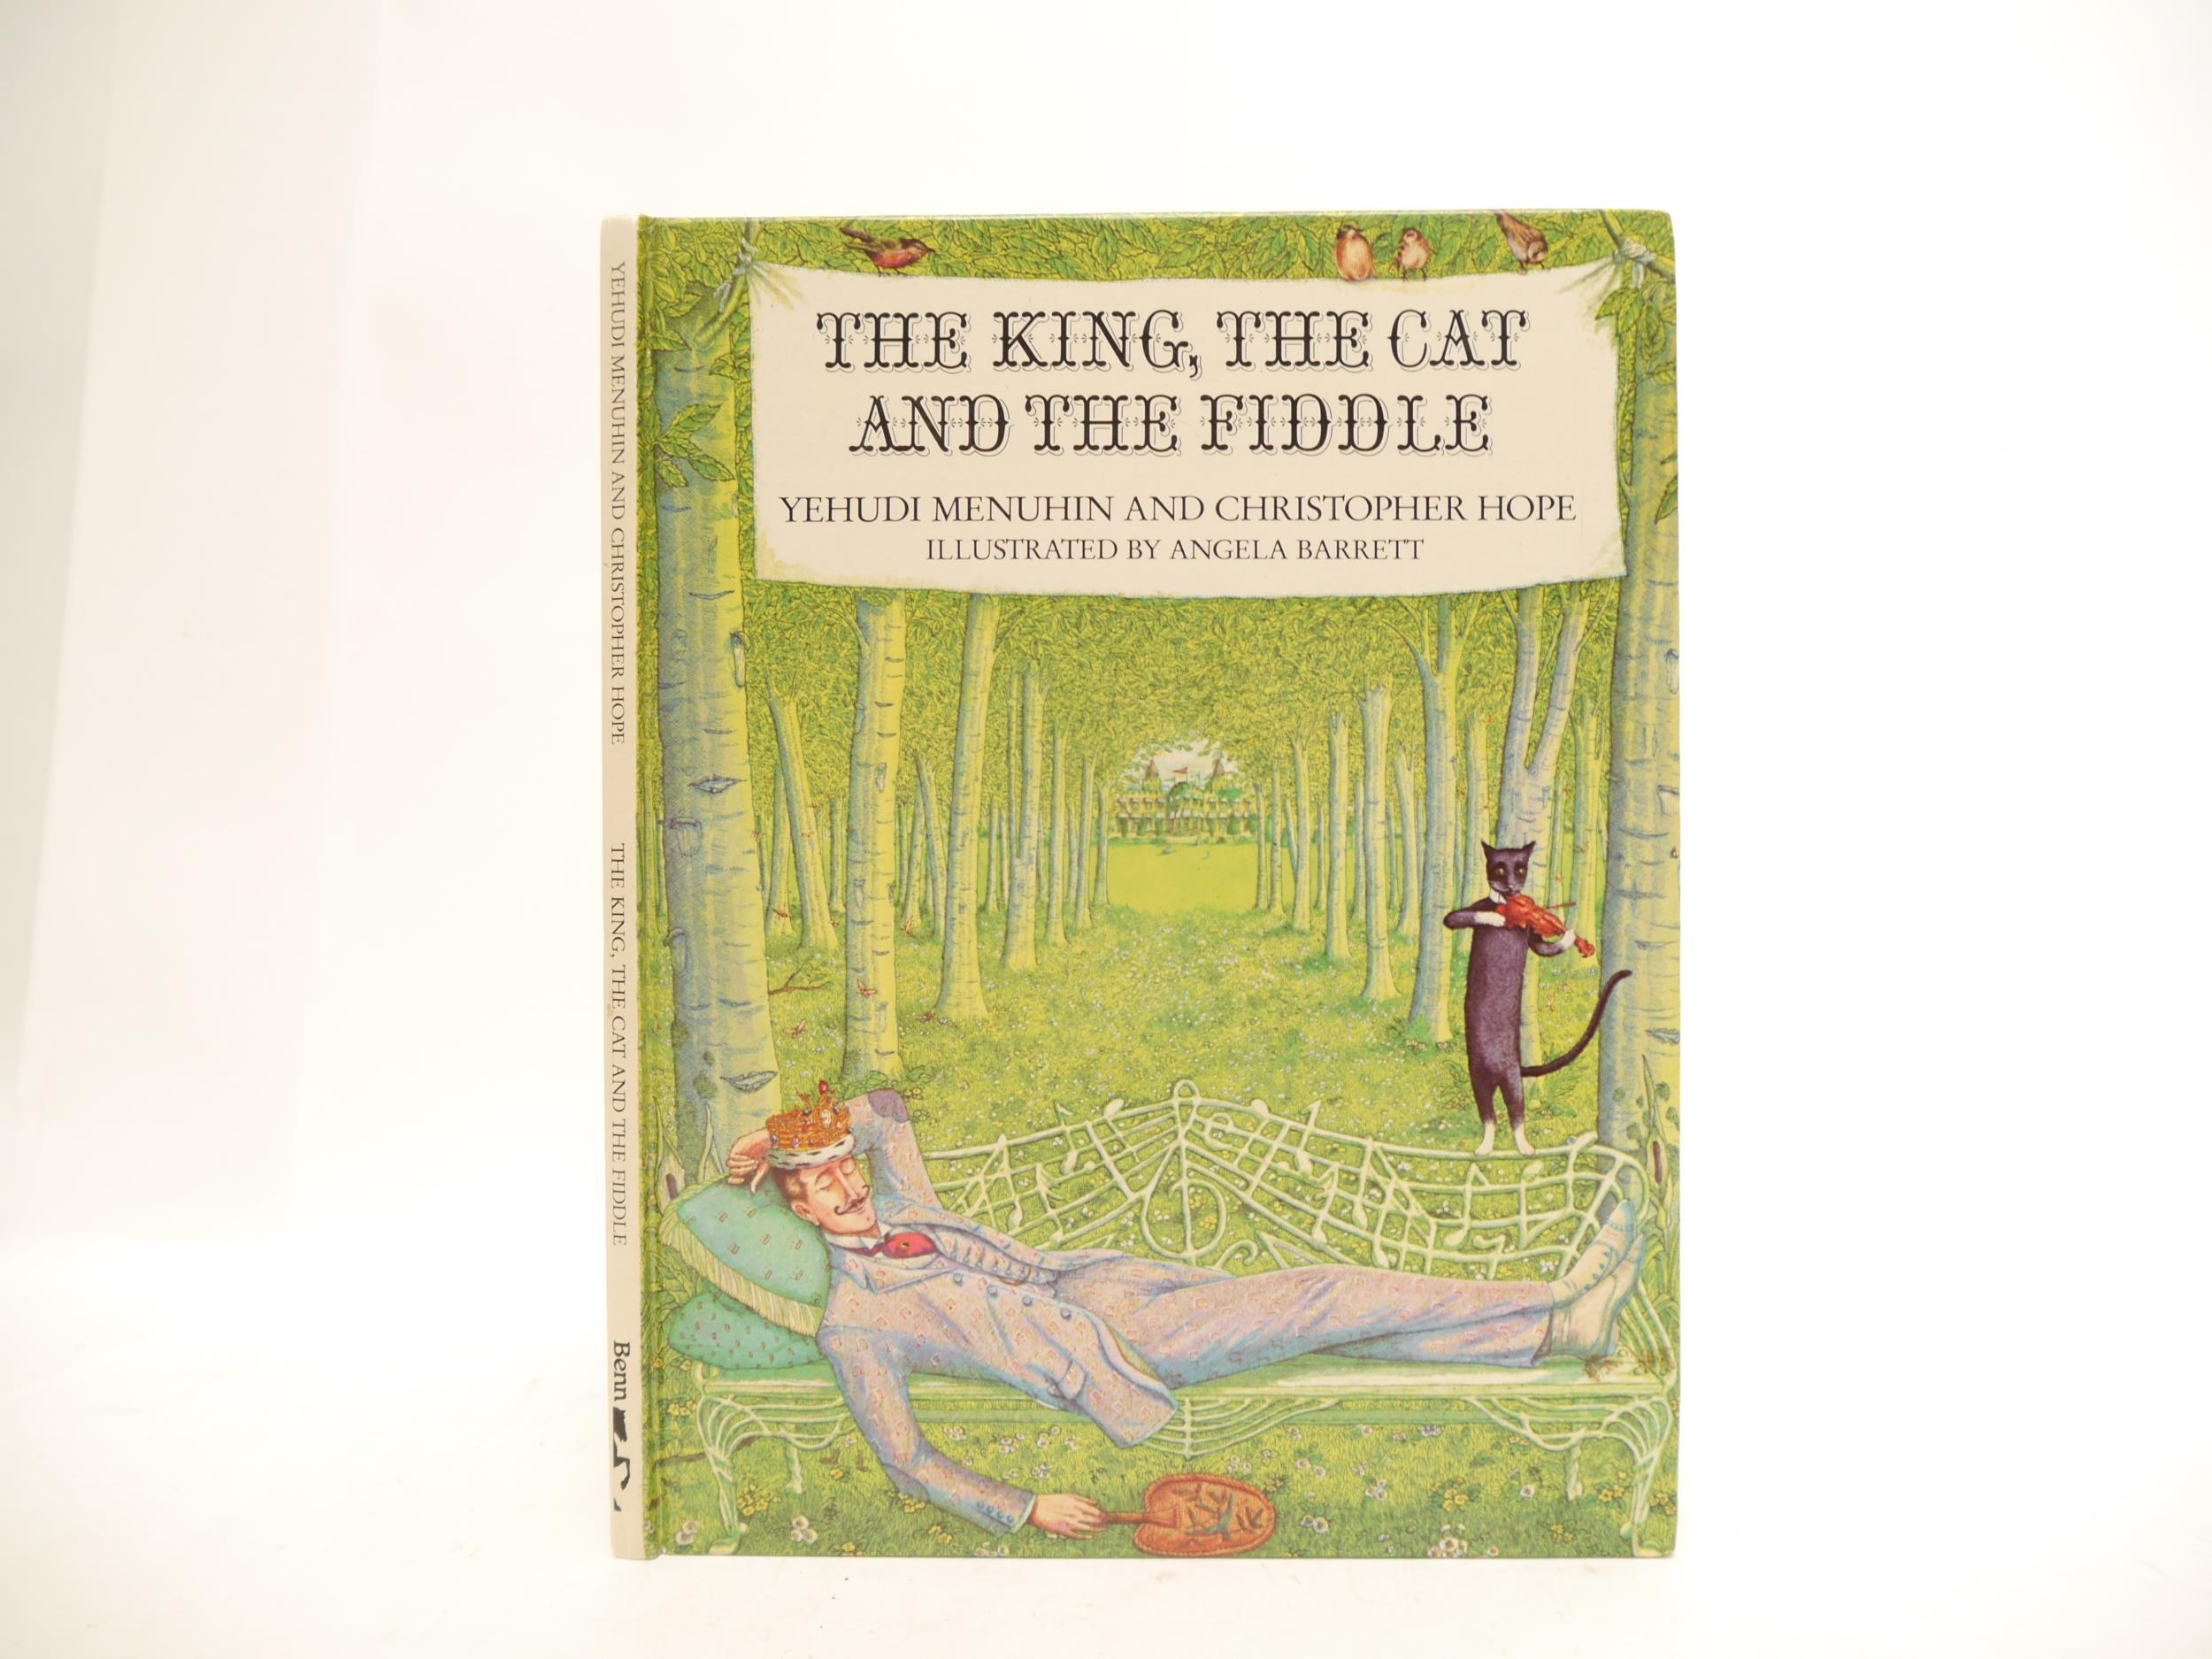 Yehudi Menuhin and Christopher Hope: 'The King, the Cat and the Fiddle. Illustrated by Angela